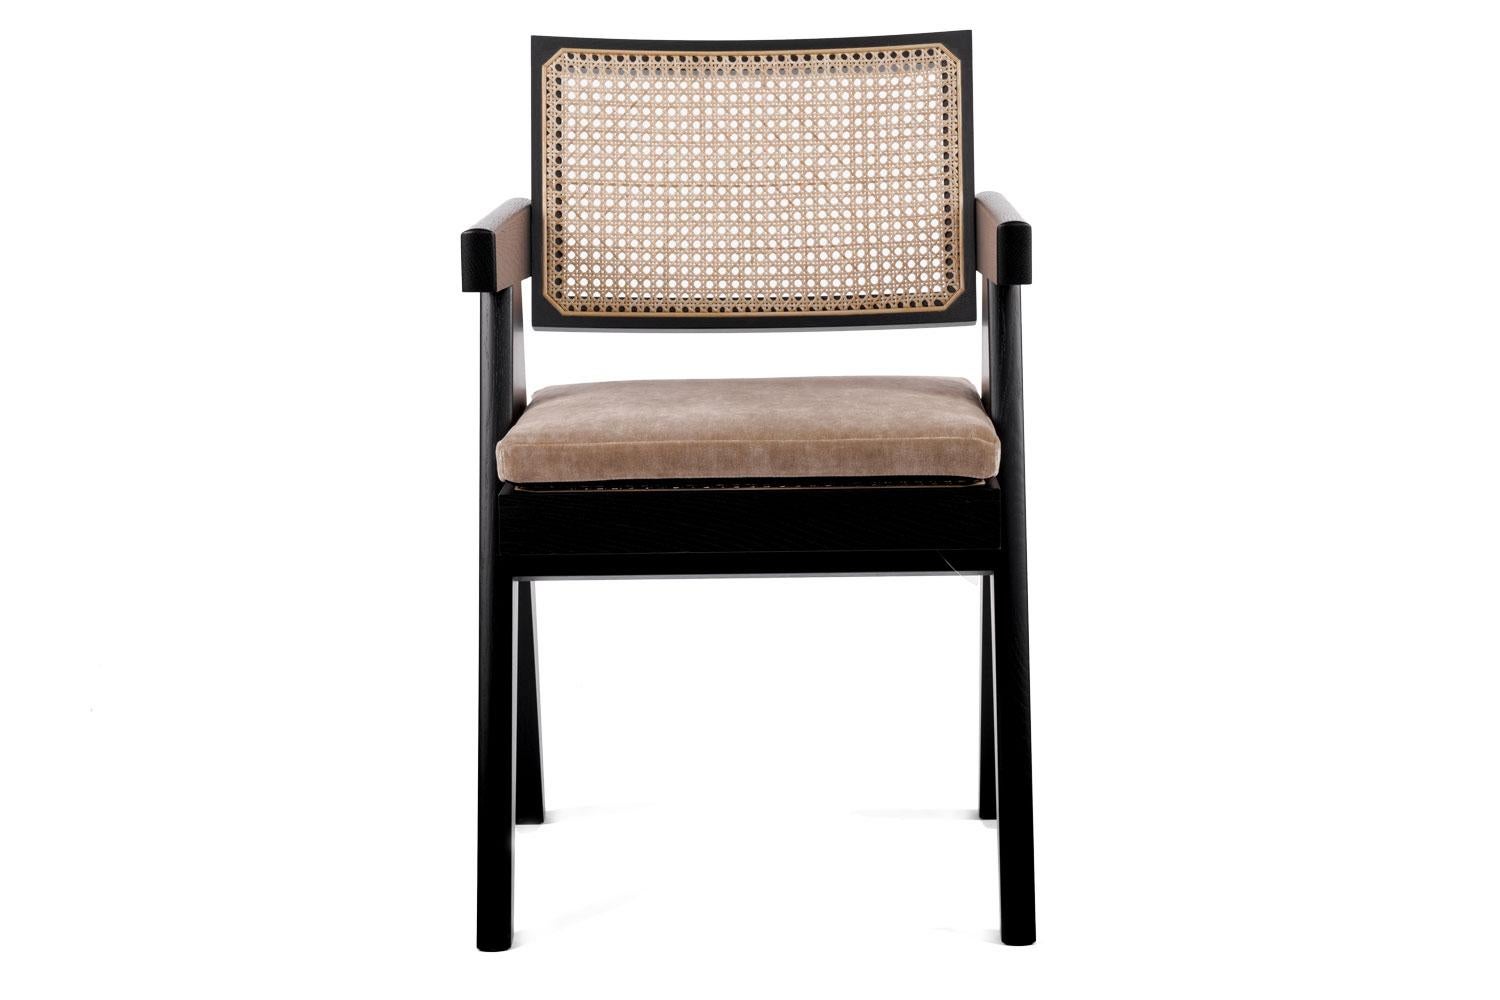 Italian Black Oak Stained Frame Chair with Woven Cane Seat + Back with Cushion, Cassina